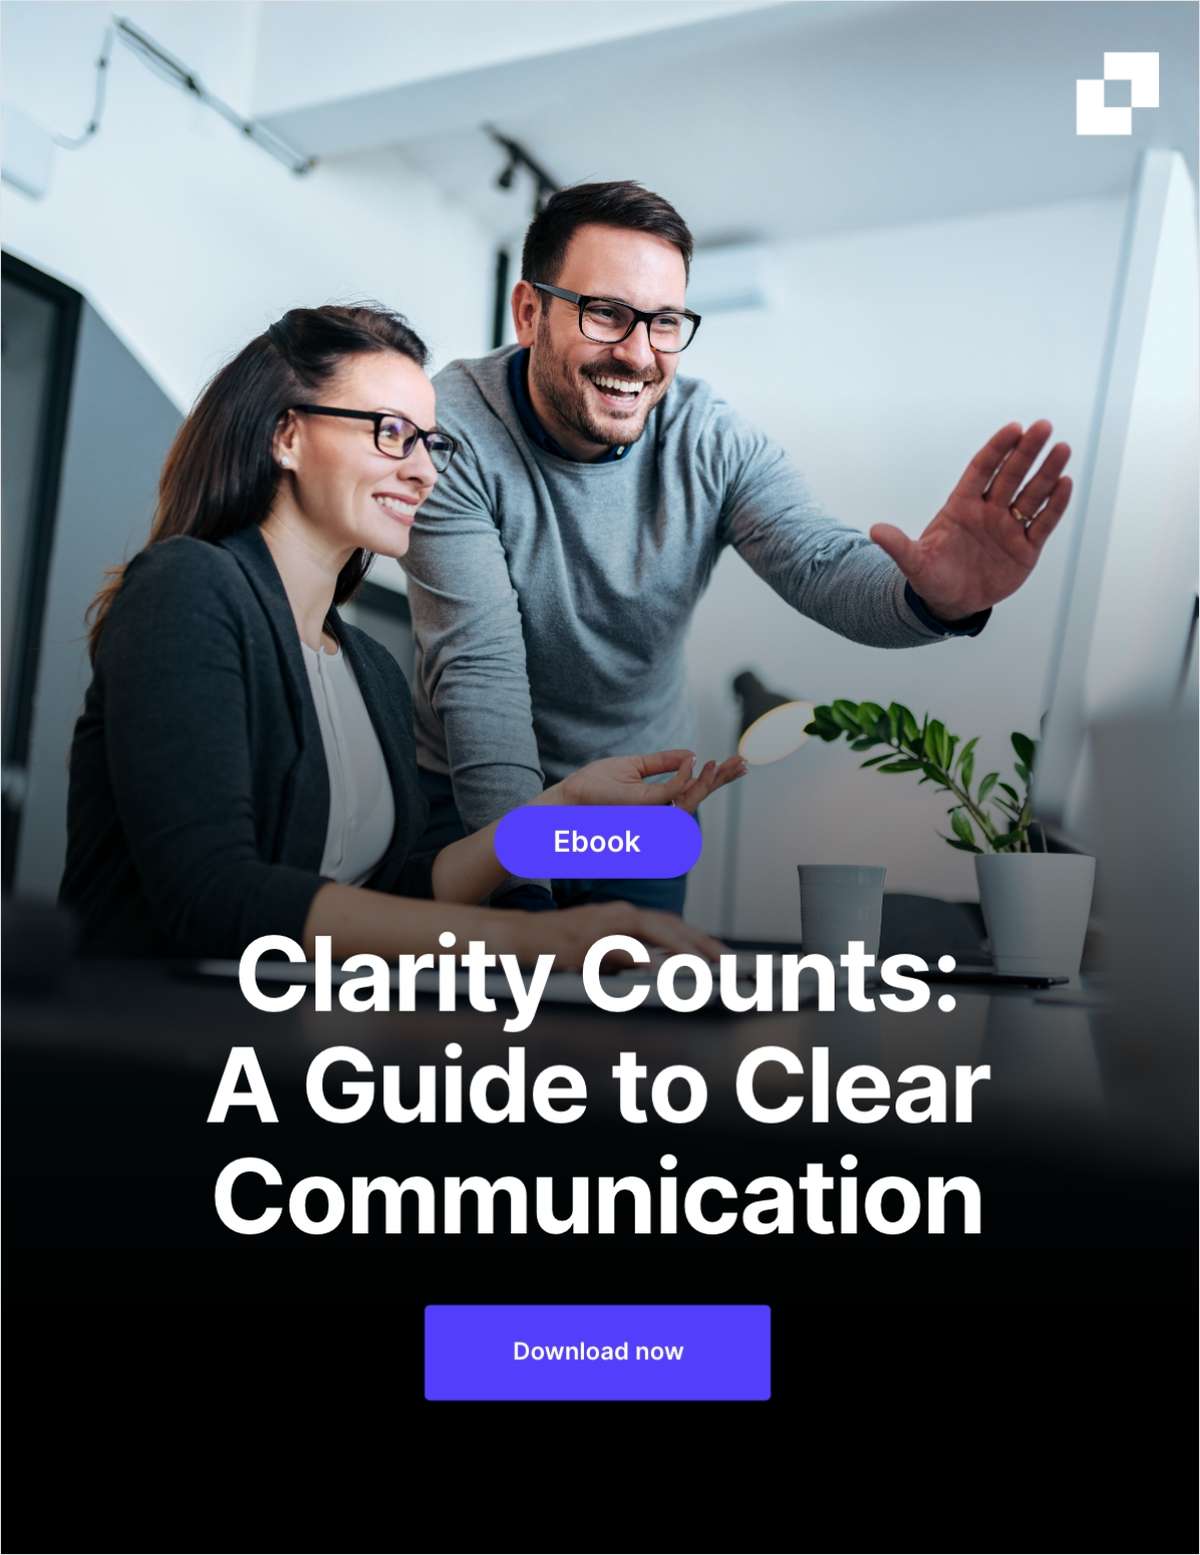 Clarity Counts: A Guide to Clear Communication